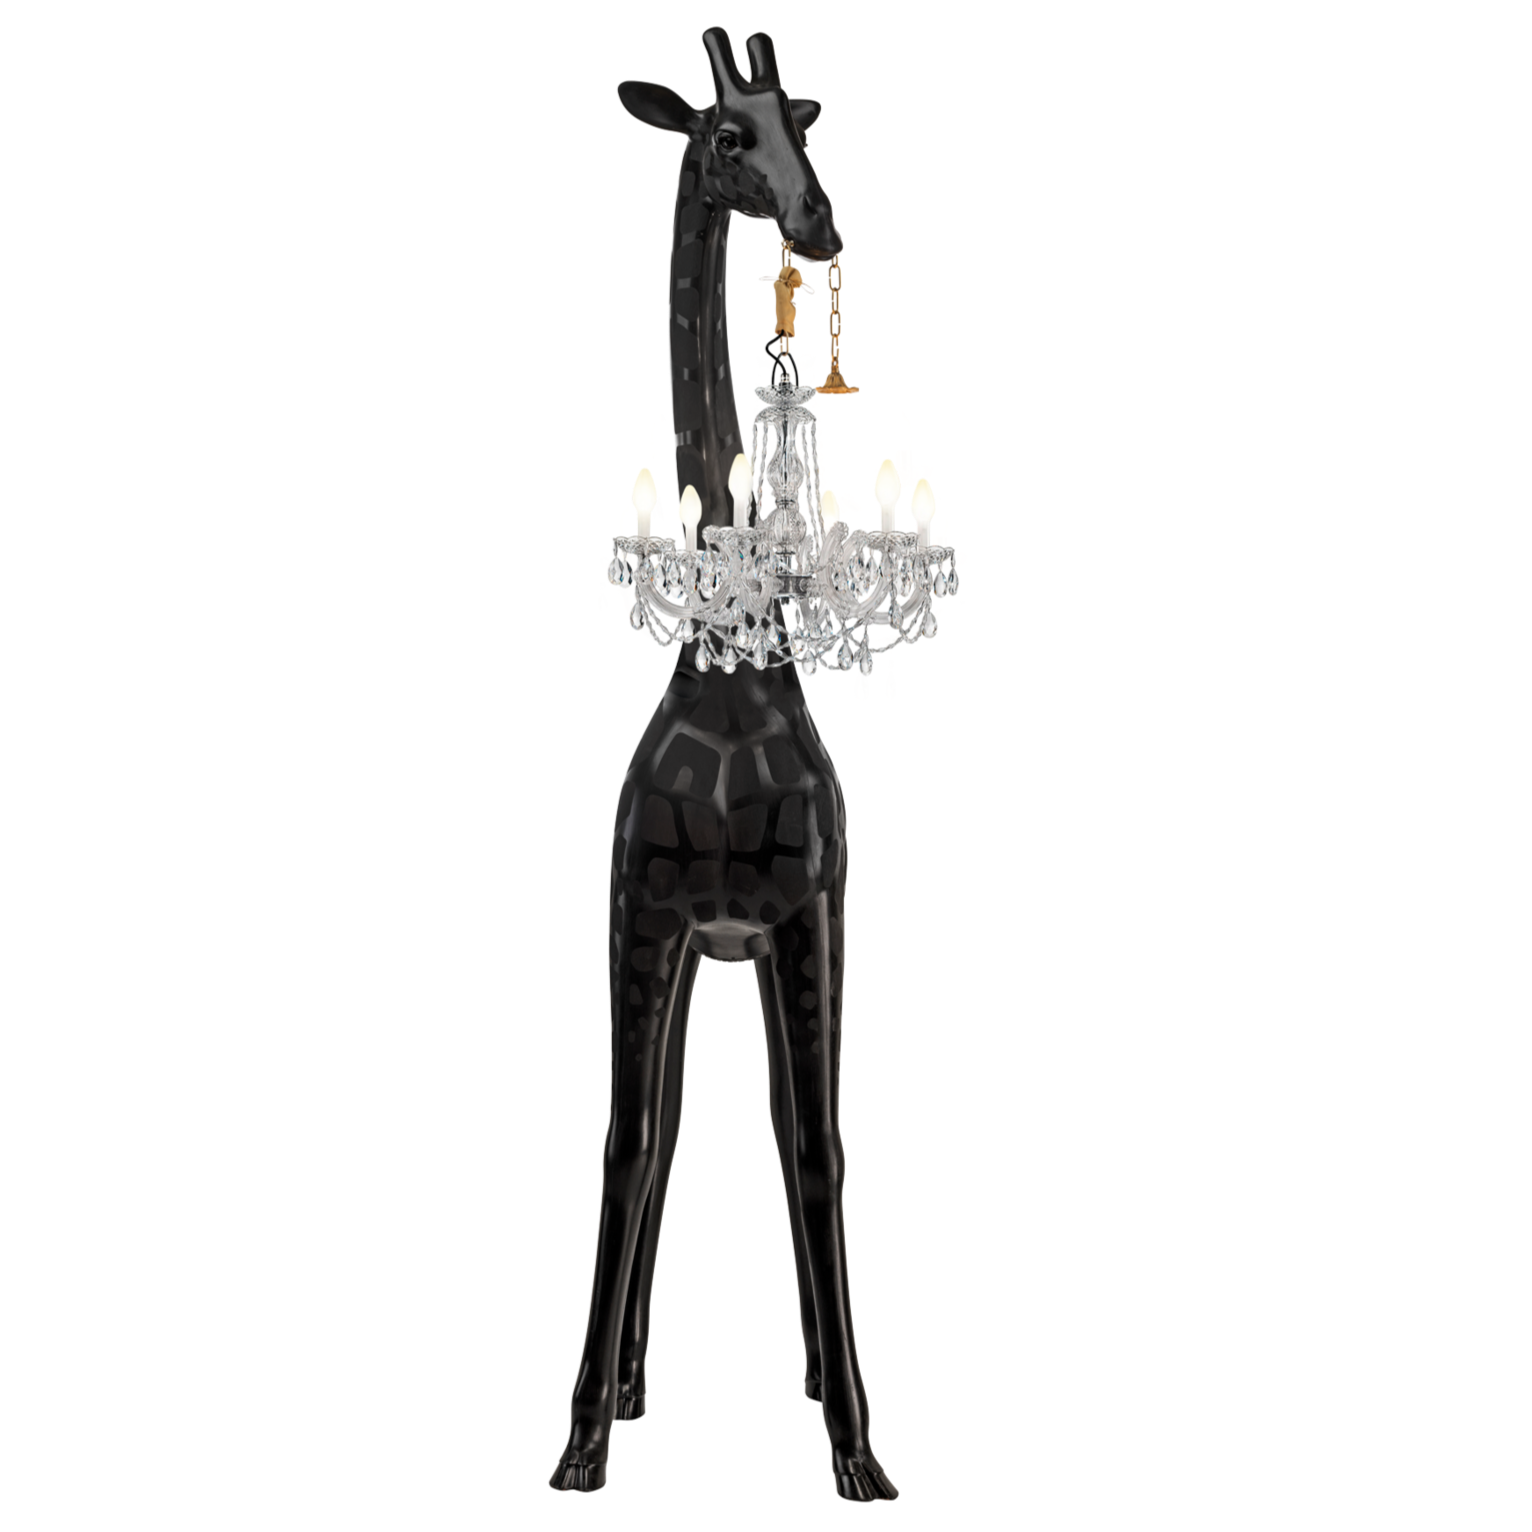 Giraffe in Love is a phenomenal lamp, designed by Marcantonio, with the size of the authentic young giraffe. The majestic giraffe holds a chandelier in the style of Maria Teresa in a miniature version. This is the perfect combination of good design with functionality.